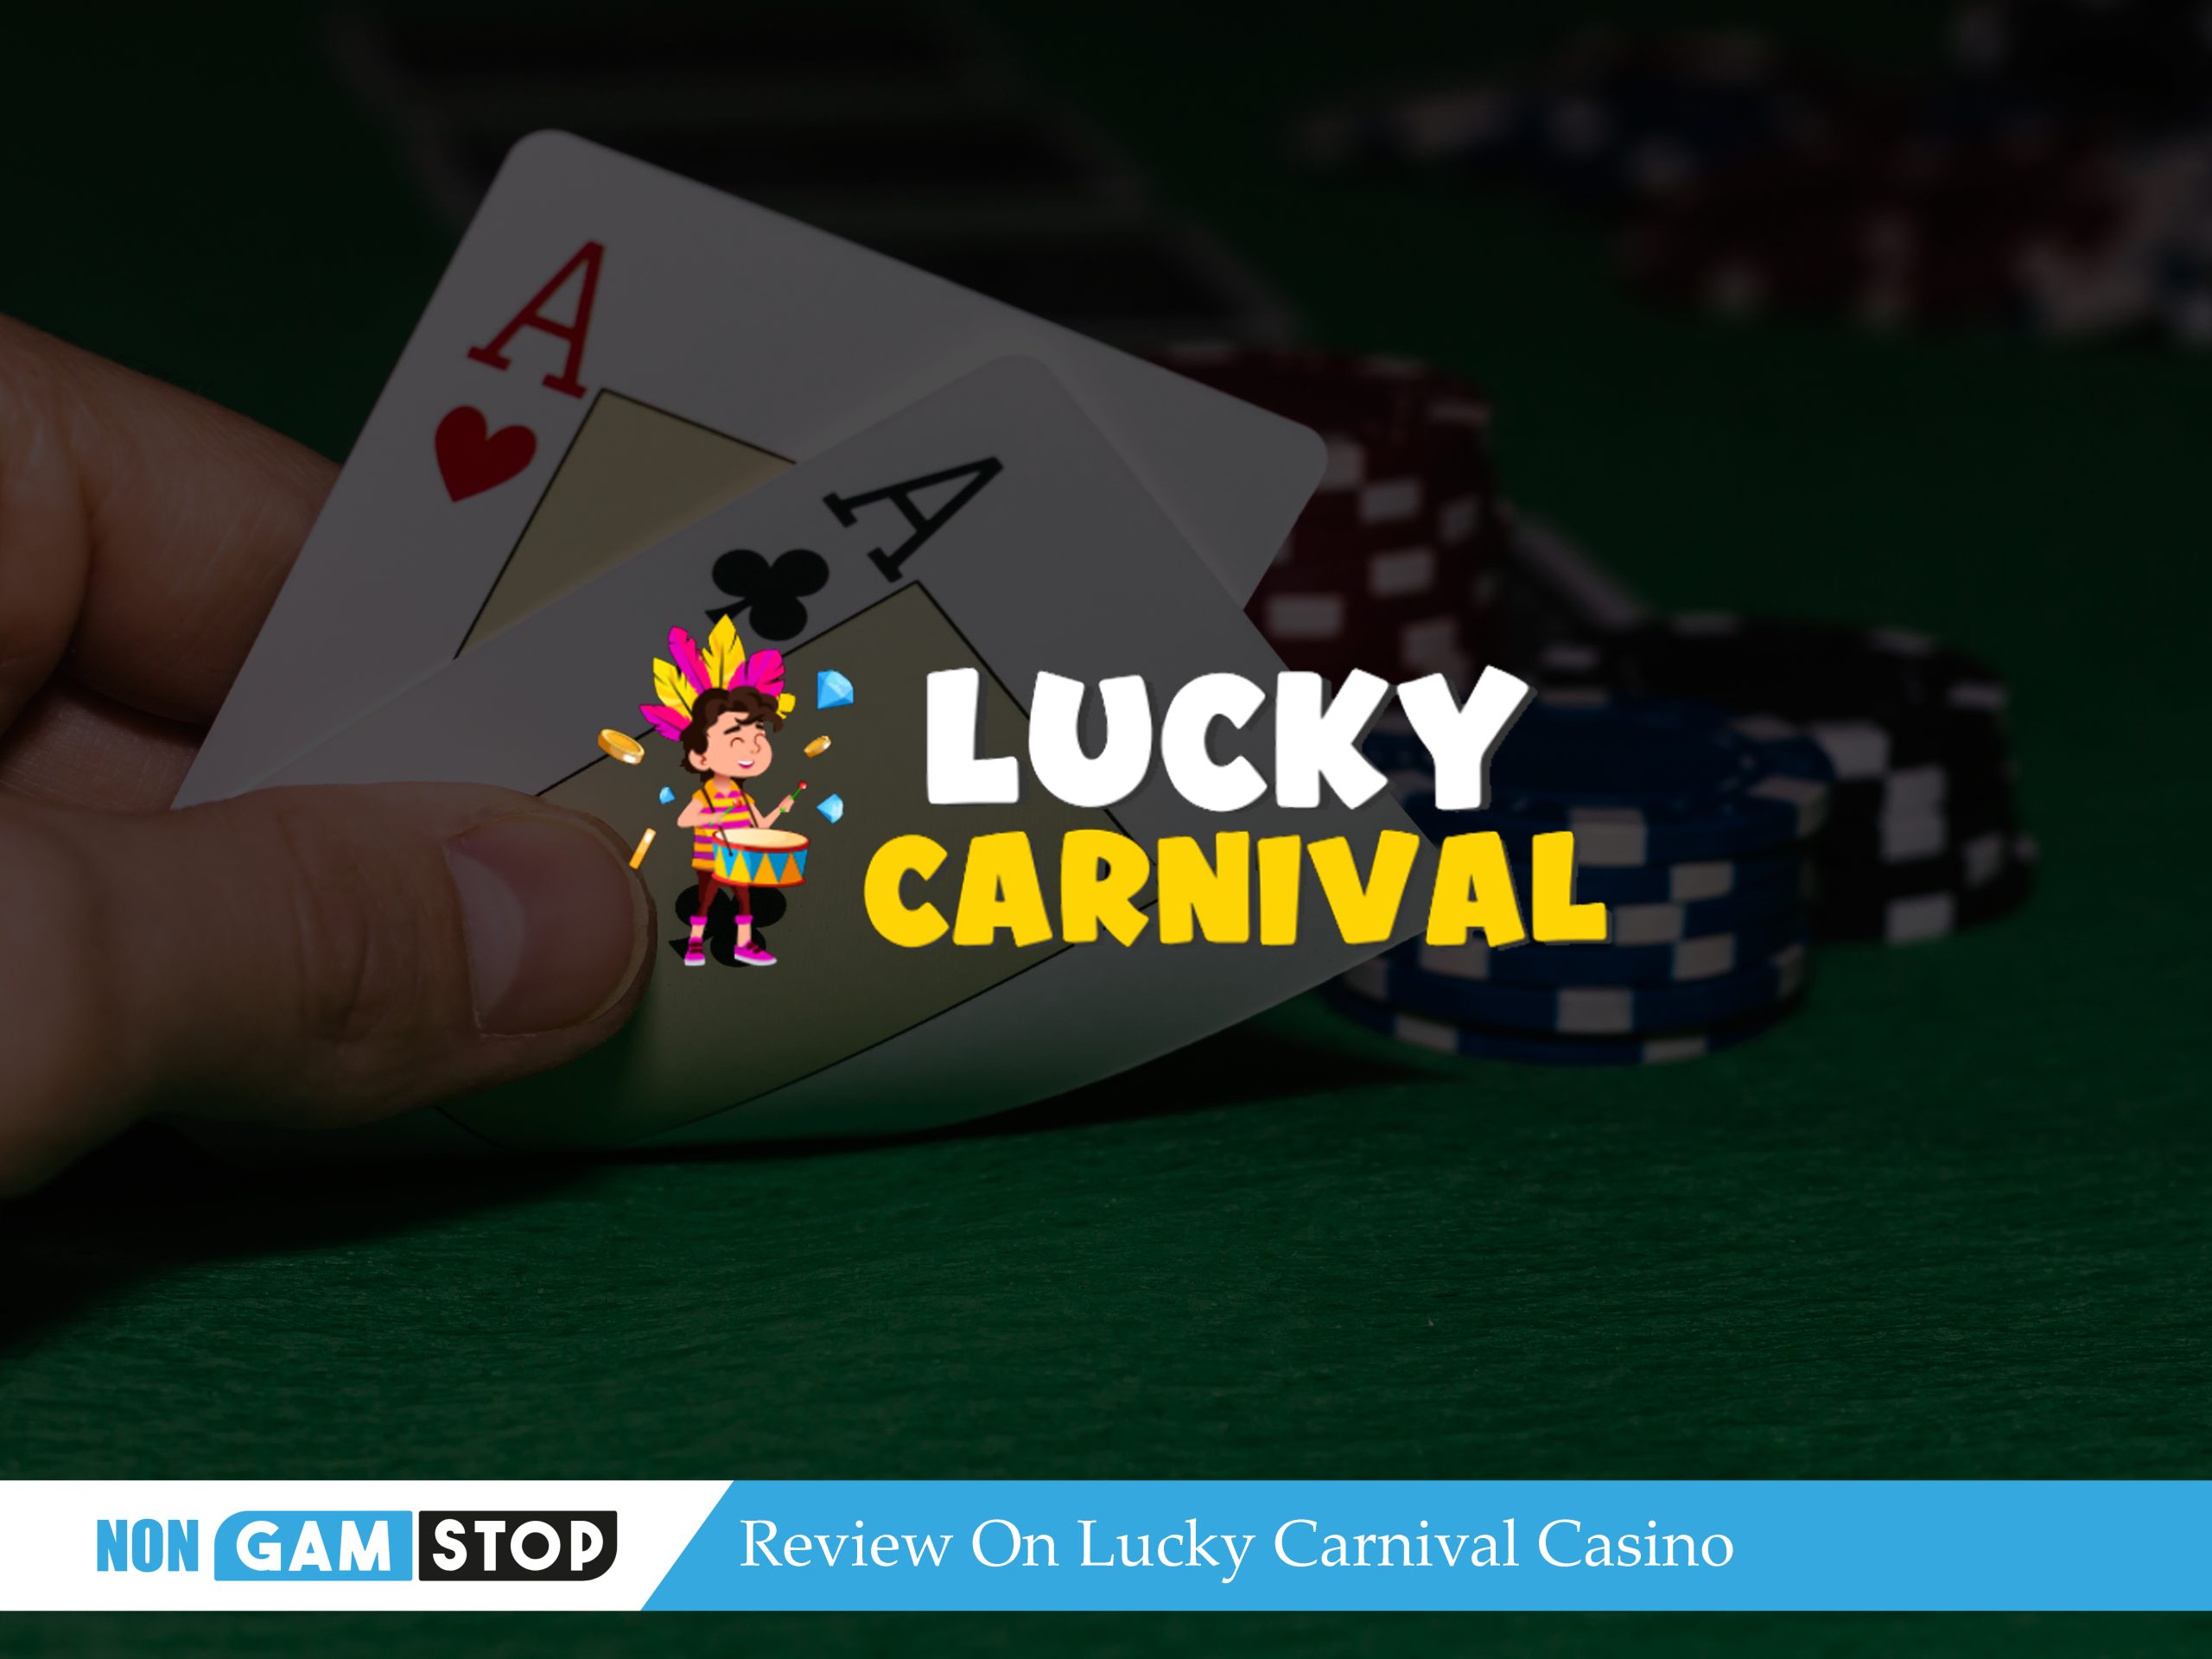 Review On Lucky Carnival Casino